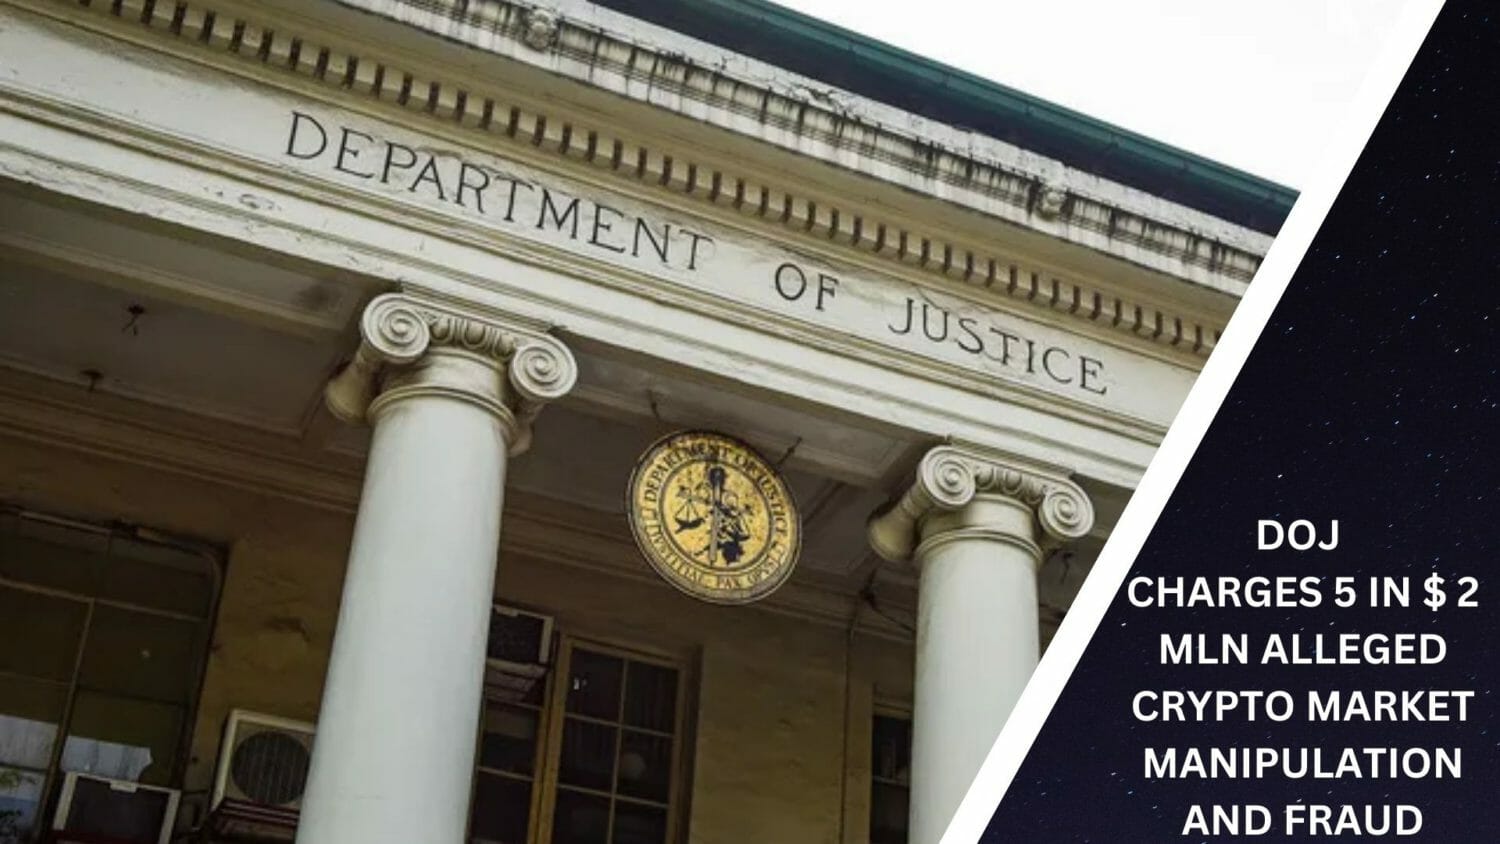 Doj Charges 5 In $ 2 Mln Alleged Crypto Market Manipulation And Fraud